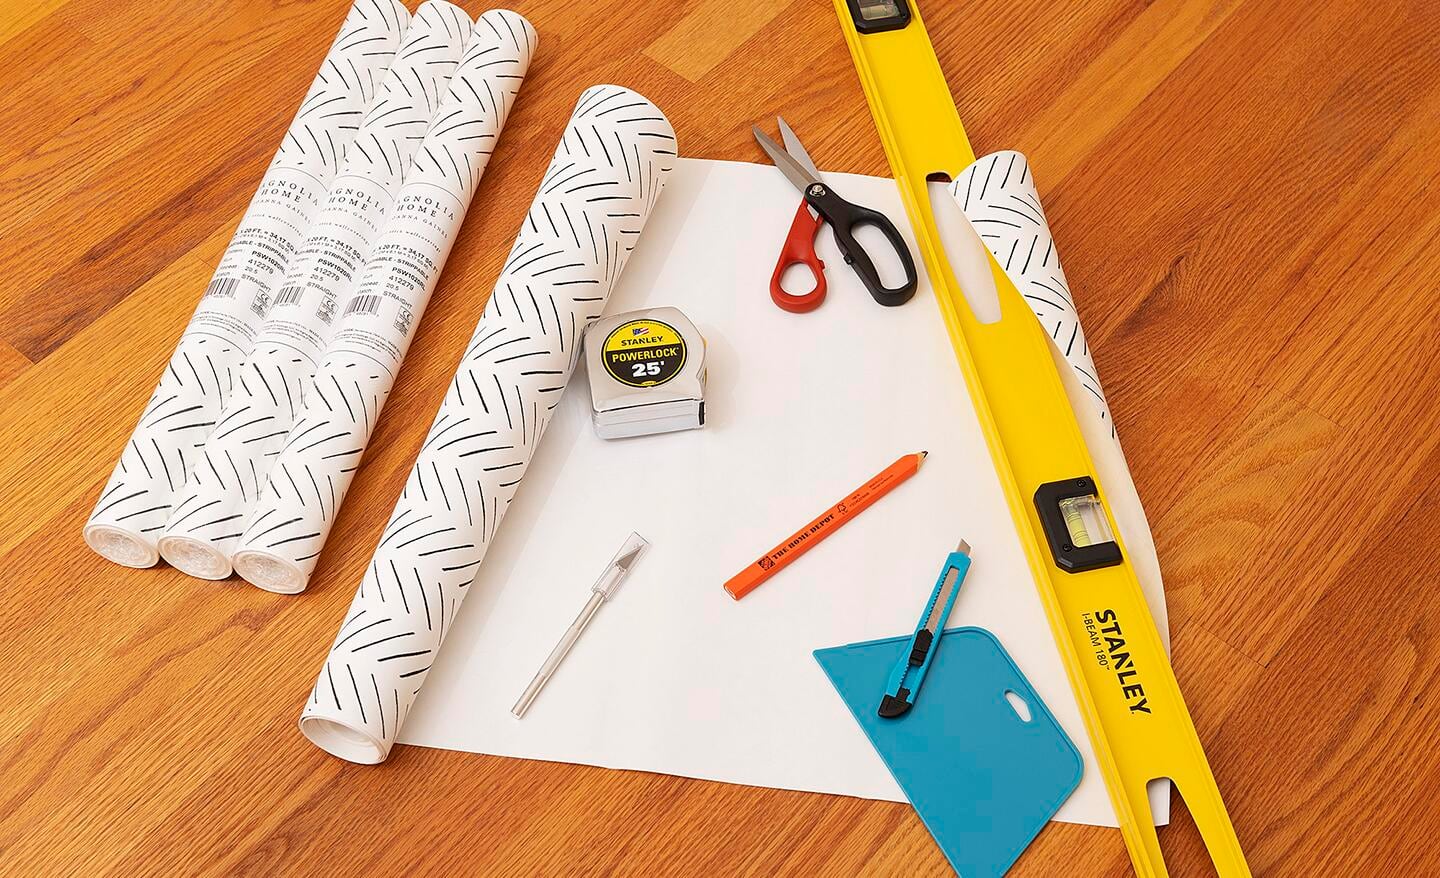 Wallpaper and tools laid out on a floor.